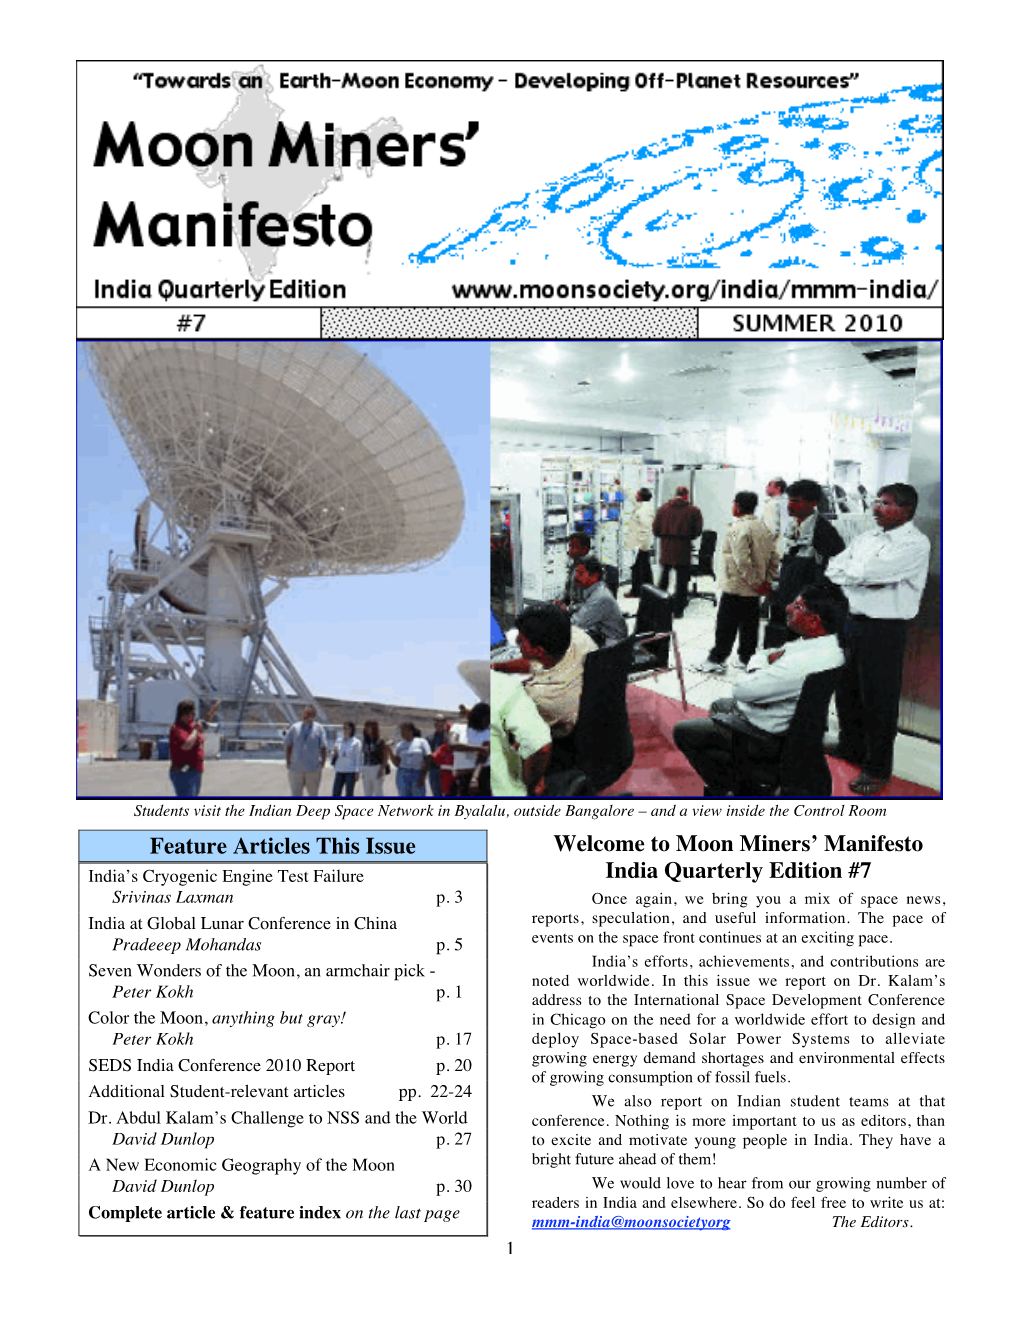 Welcome to Moon Miners' Manifesto India Quarterly Edition #7